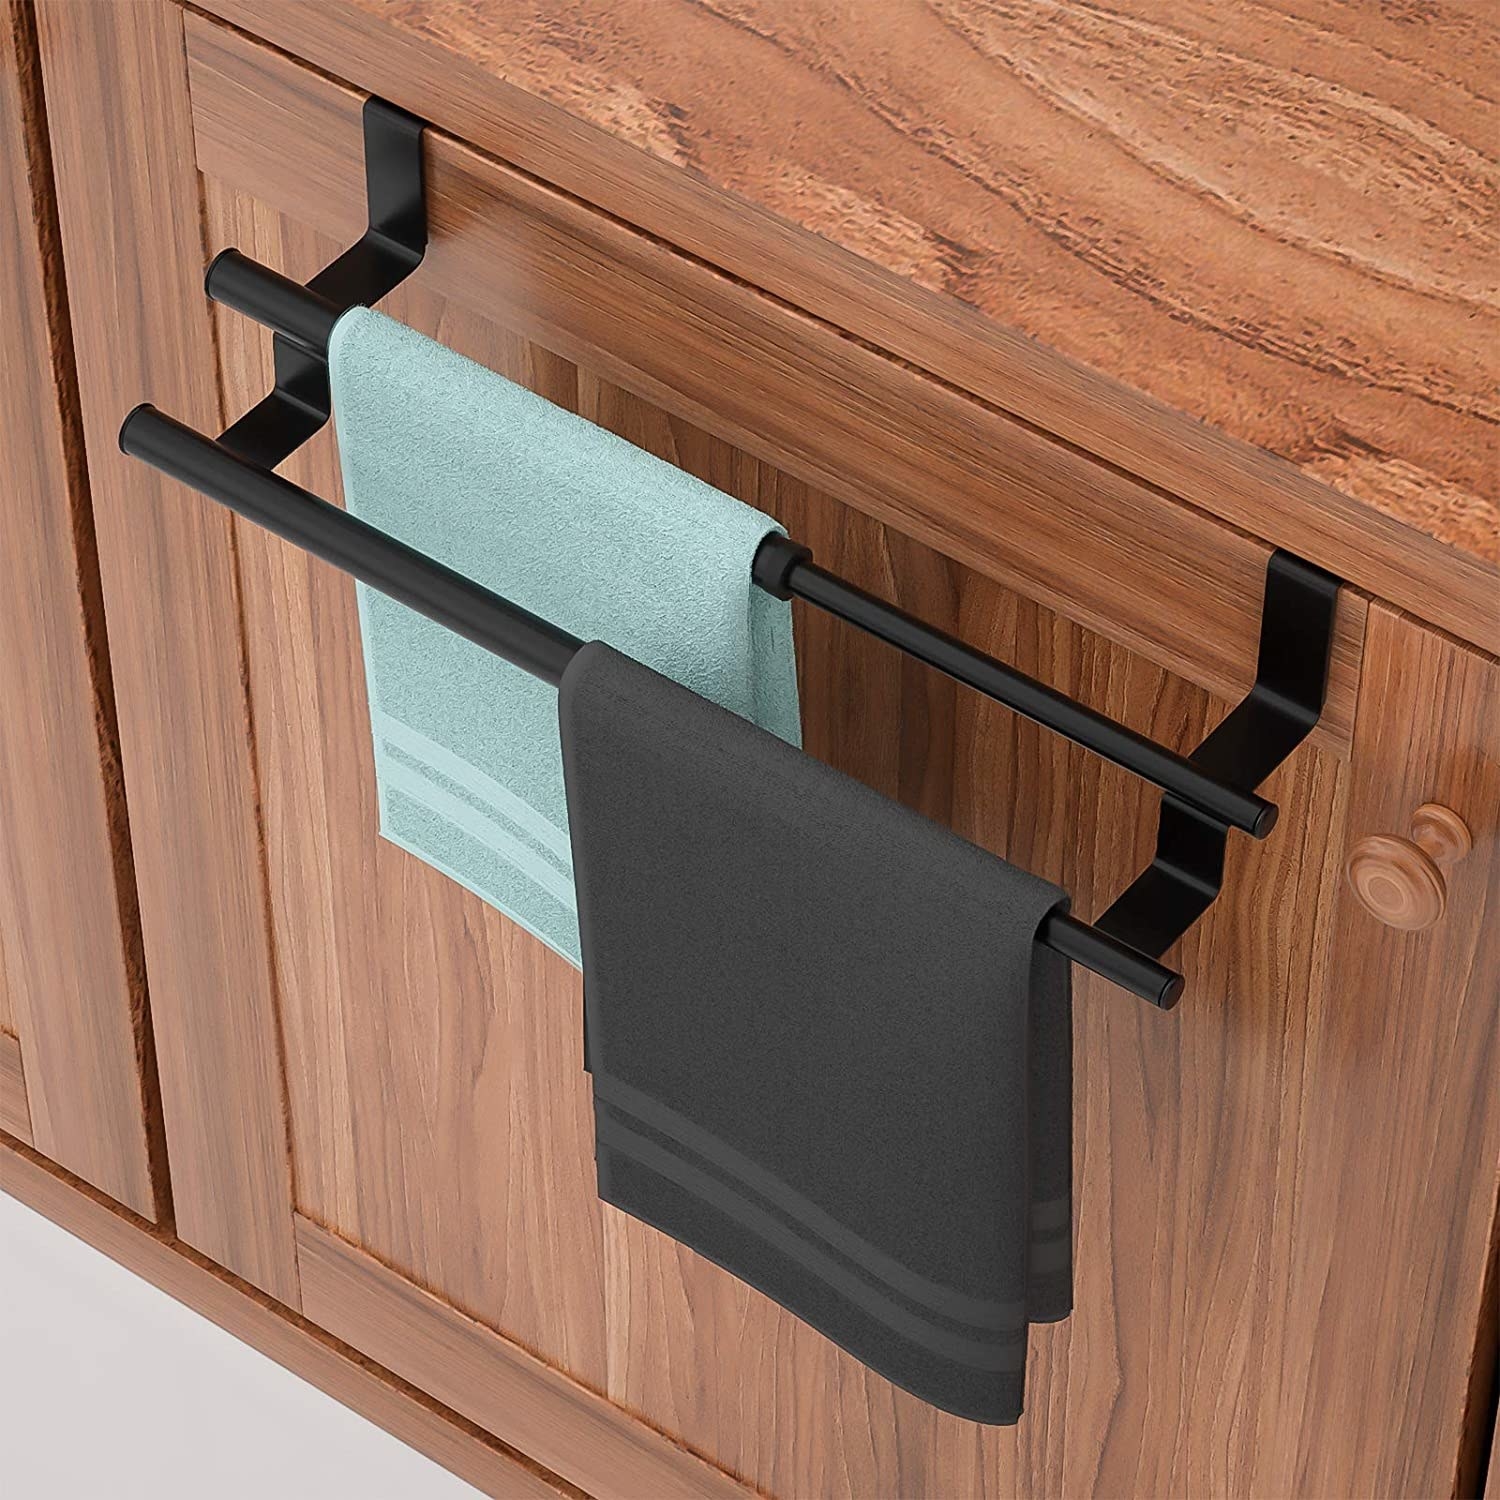 The towel racks hanging over lower kitchen cabinets in a kitchen